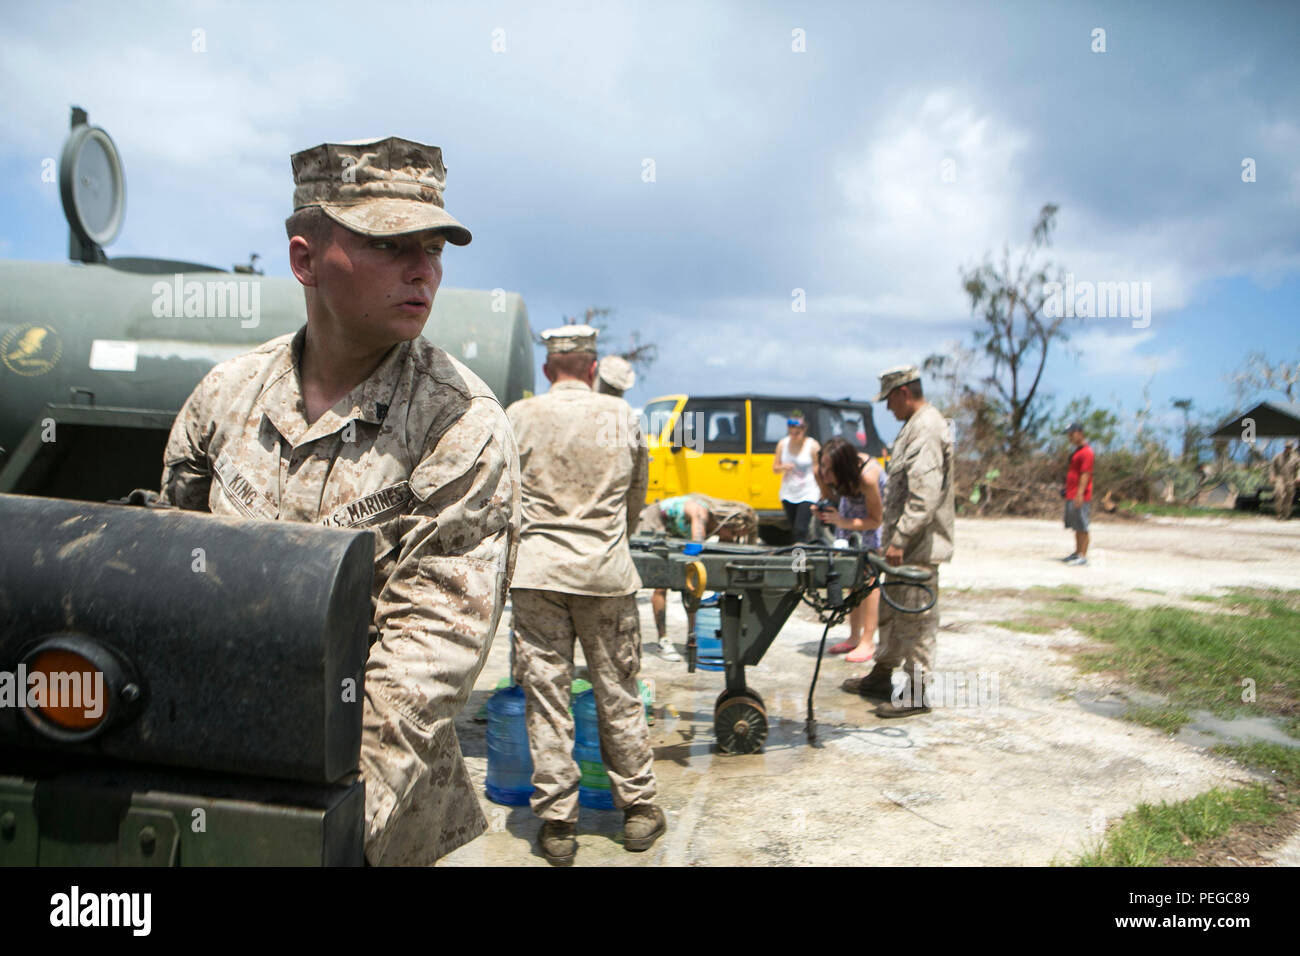 U.S. Marine Cpl. Shamus King with Combat Logistics Battalion 31, 31st Marine Expeditionary Unit, distributes water to local civilians as part of typhoon relief efforts in Saipan, Aug. 11, 2015. The 31st MEU and the ships of the Bonhomme Richard Amphibious Ready Group are assisting the Federal Emergency Management Agency with distributing emergency relief supplies to Saipan after the island was struck by Typhoon Soudelor, Aug. 2-3. (U.S. Marine Corps photo by Lance Cpl. Brian Bekkala/Released.) Stock Photo